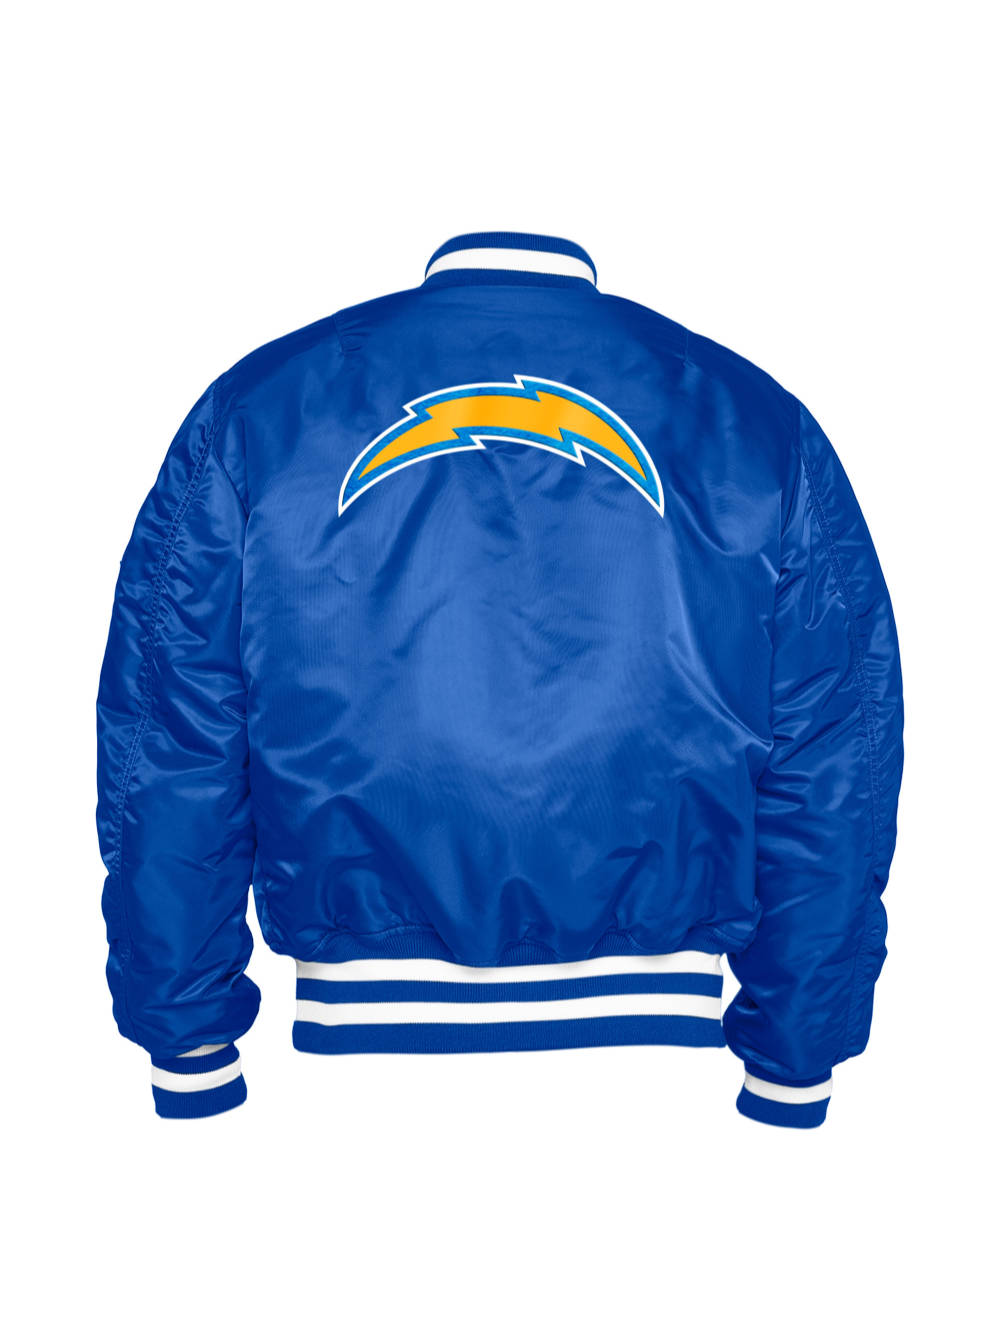 LOS ANGELES CHARGERS X ALPHA X NEW ERA MA-1 BOMBER JACKET OUTERWEAR Alpha Industries 